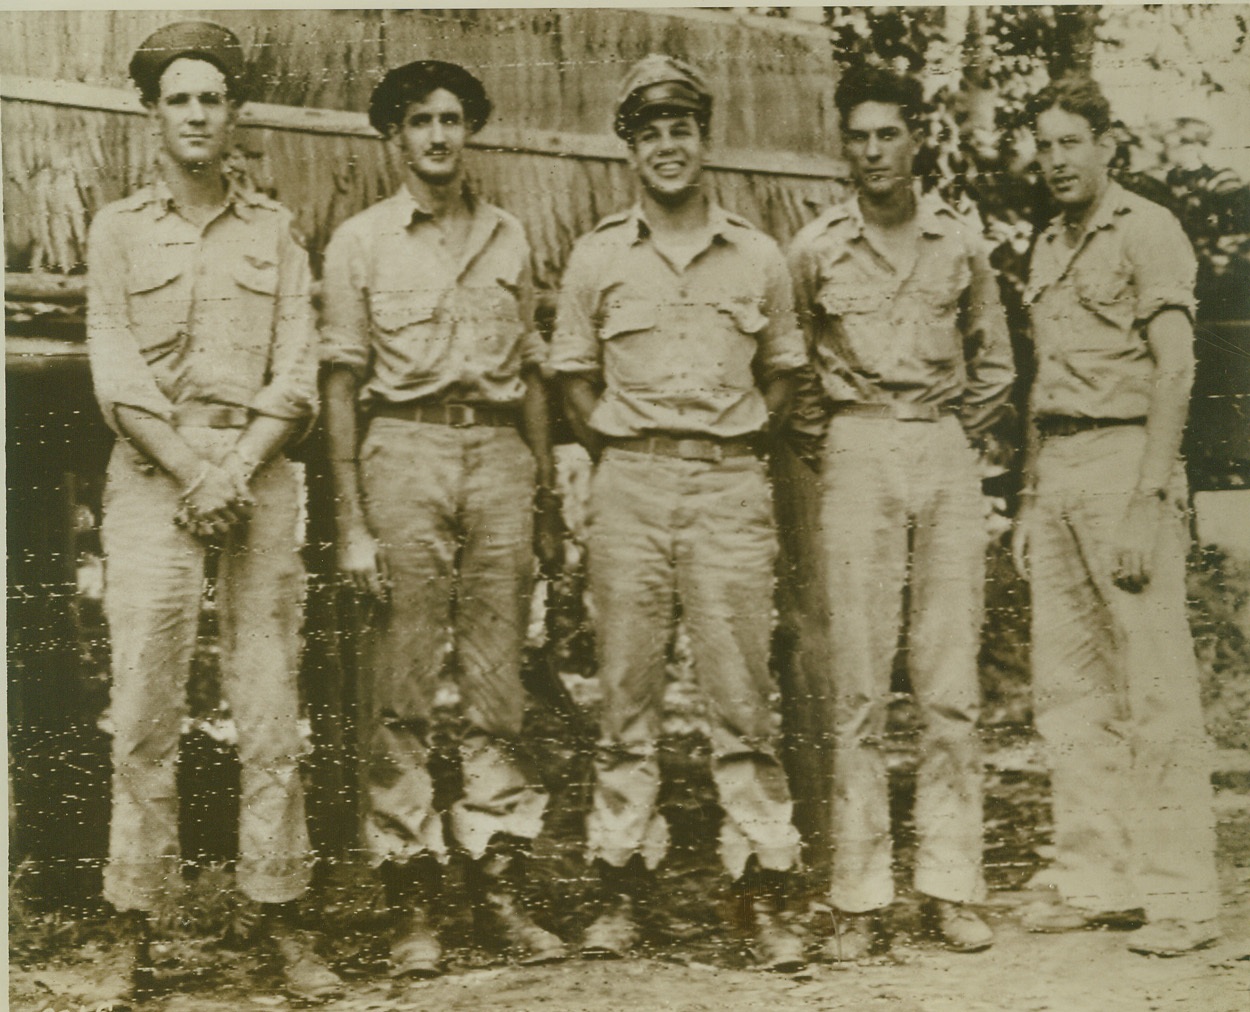 HELPED WIPE OUT JAP PLANES, 10/14/1943. These five U.S. pilots helped knock 177 Jap planes out of action at Raboul when every available plane in General MacArthur’s aerial arsenal dropped 350 tons of bombs on the base in New Britain. They are (left to right) Lt. Charles E. Moorfield, Arlington, VA.; Lt. Clifford P. Taylor, Woodhaven, L. I. N. Y.; Lt. Gilbert S. Stiles, Welty, Okla.; and Lt. Donald T. Lees, Rock Island, Ill. The pilot at right is unidentified. Credit: U.S. Army Signal Corps photo via OWI Radiophoto from ACME;